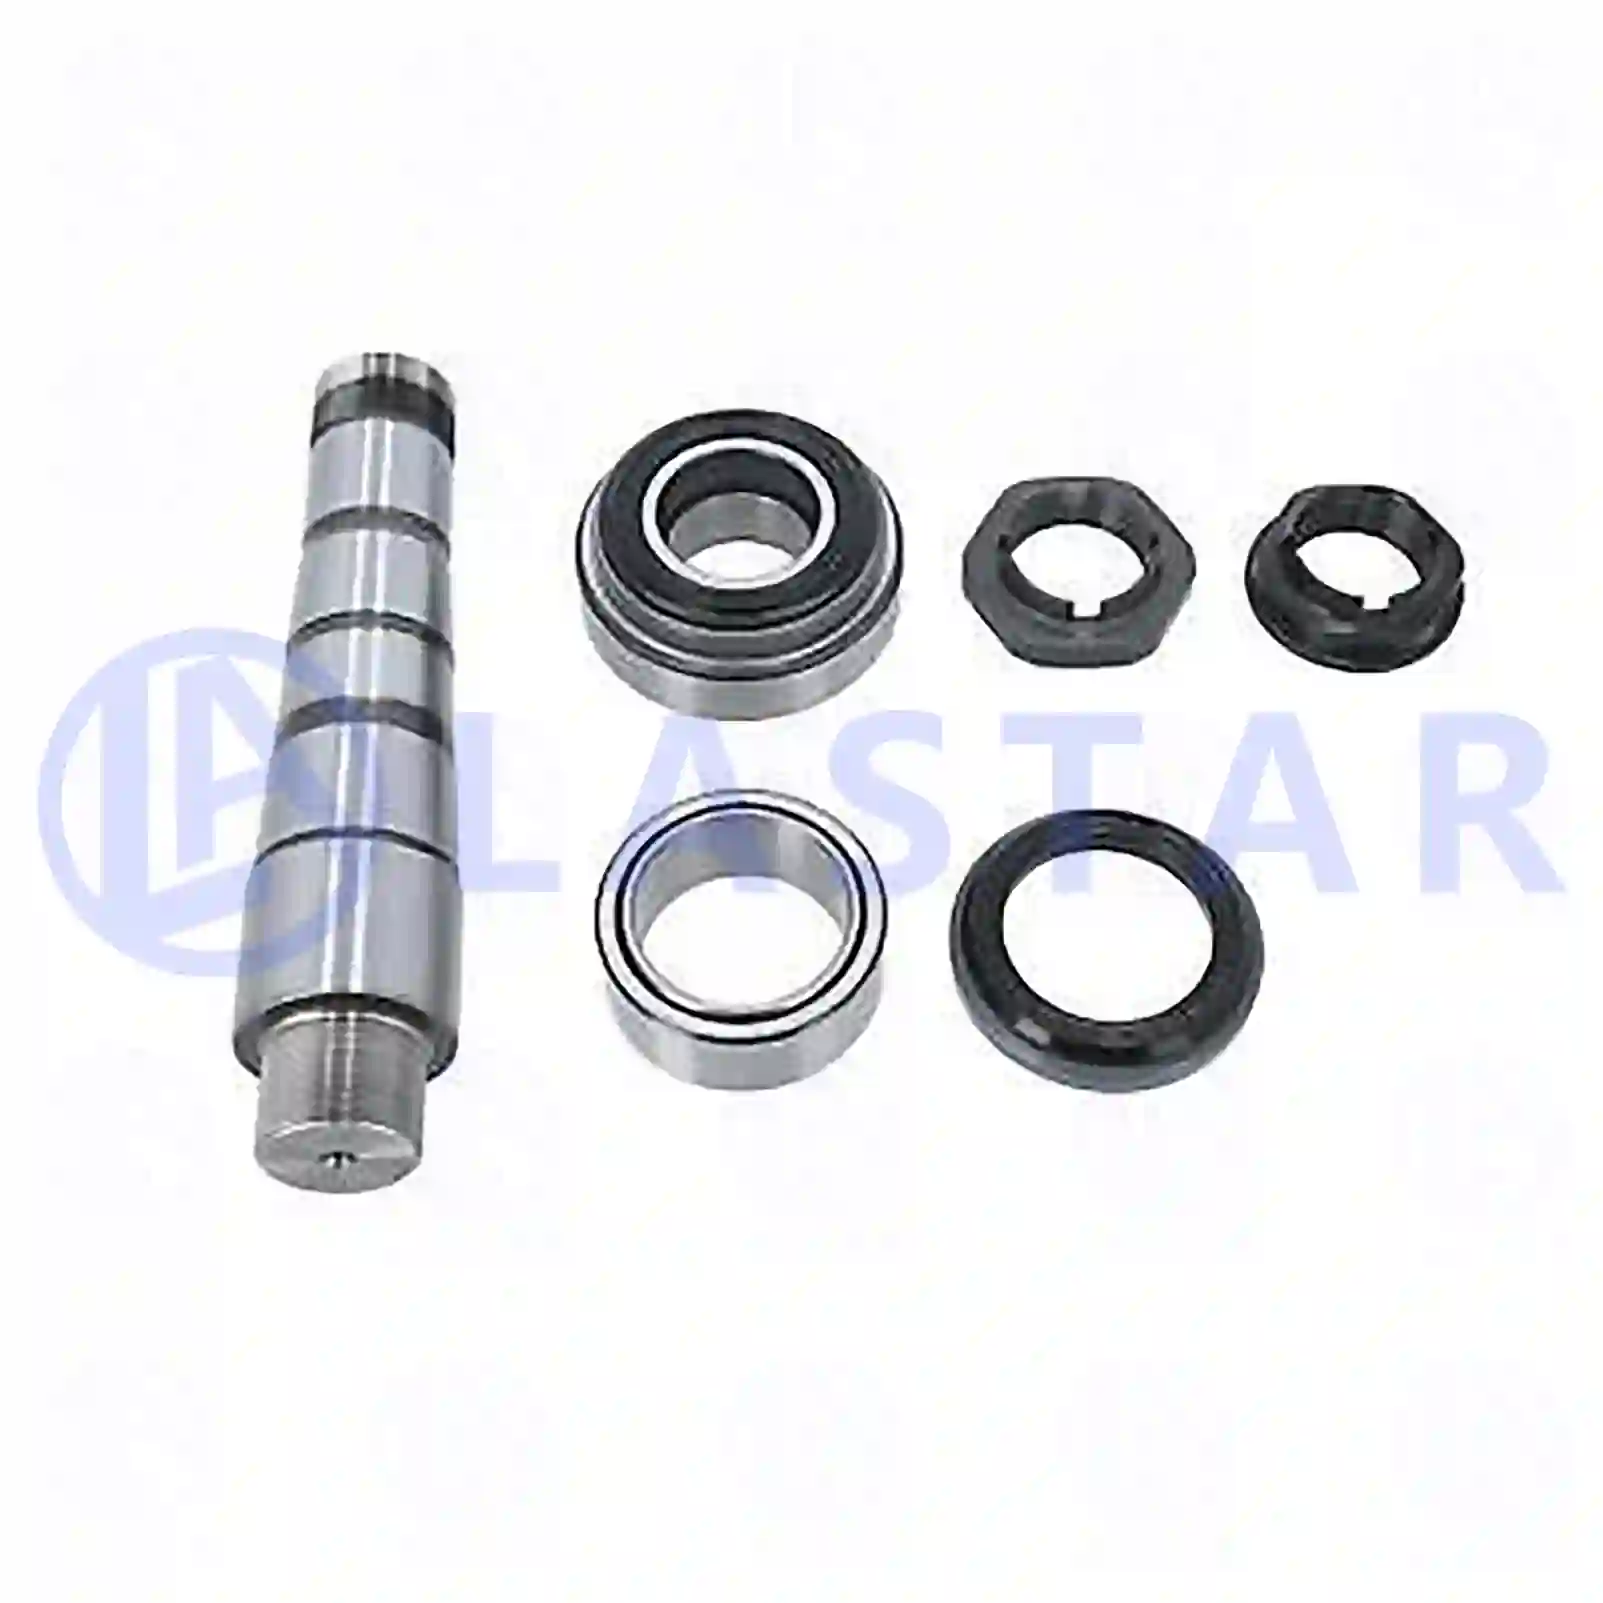 King pin kit, with bearing, 77730650, 7421768314, 20523015S1, 20751021, ZG41298-0008, , ||  77730650 Lastar Spare Part | Truck Spare Parts, Auotomotive Spare Parts King pin kit, with bearing, 77730650, 7421768314, 20523015S1, 20751021, ZG41298-0008, , ||  77730650 Lastar Spare Part | Truck Spare Parts, Auotomotive Spare Parts